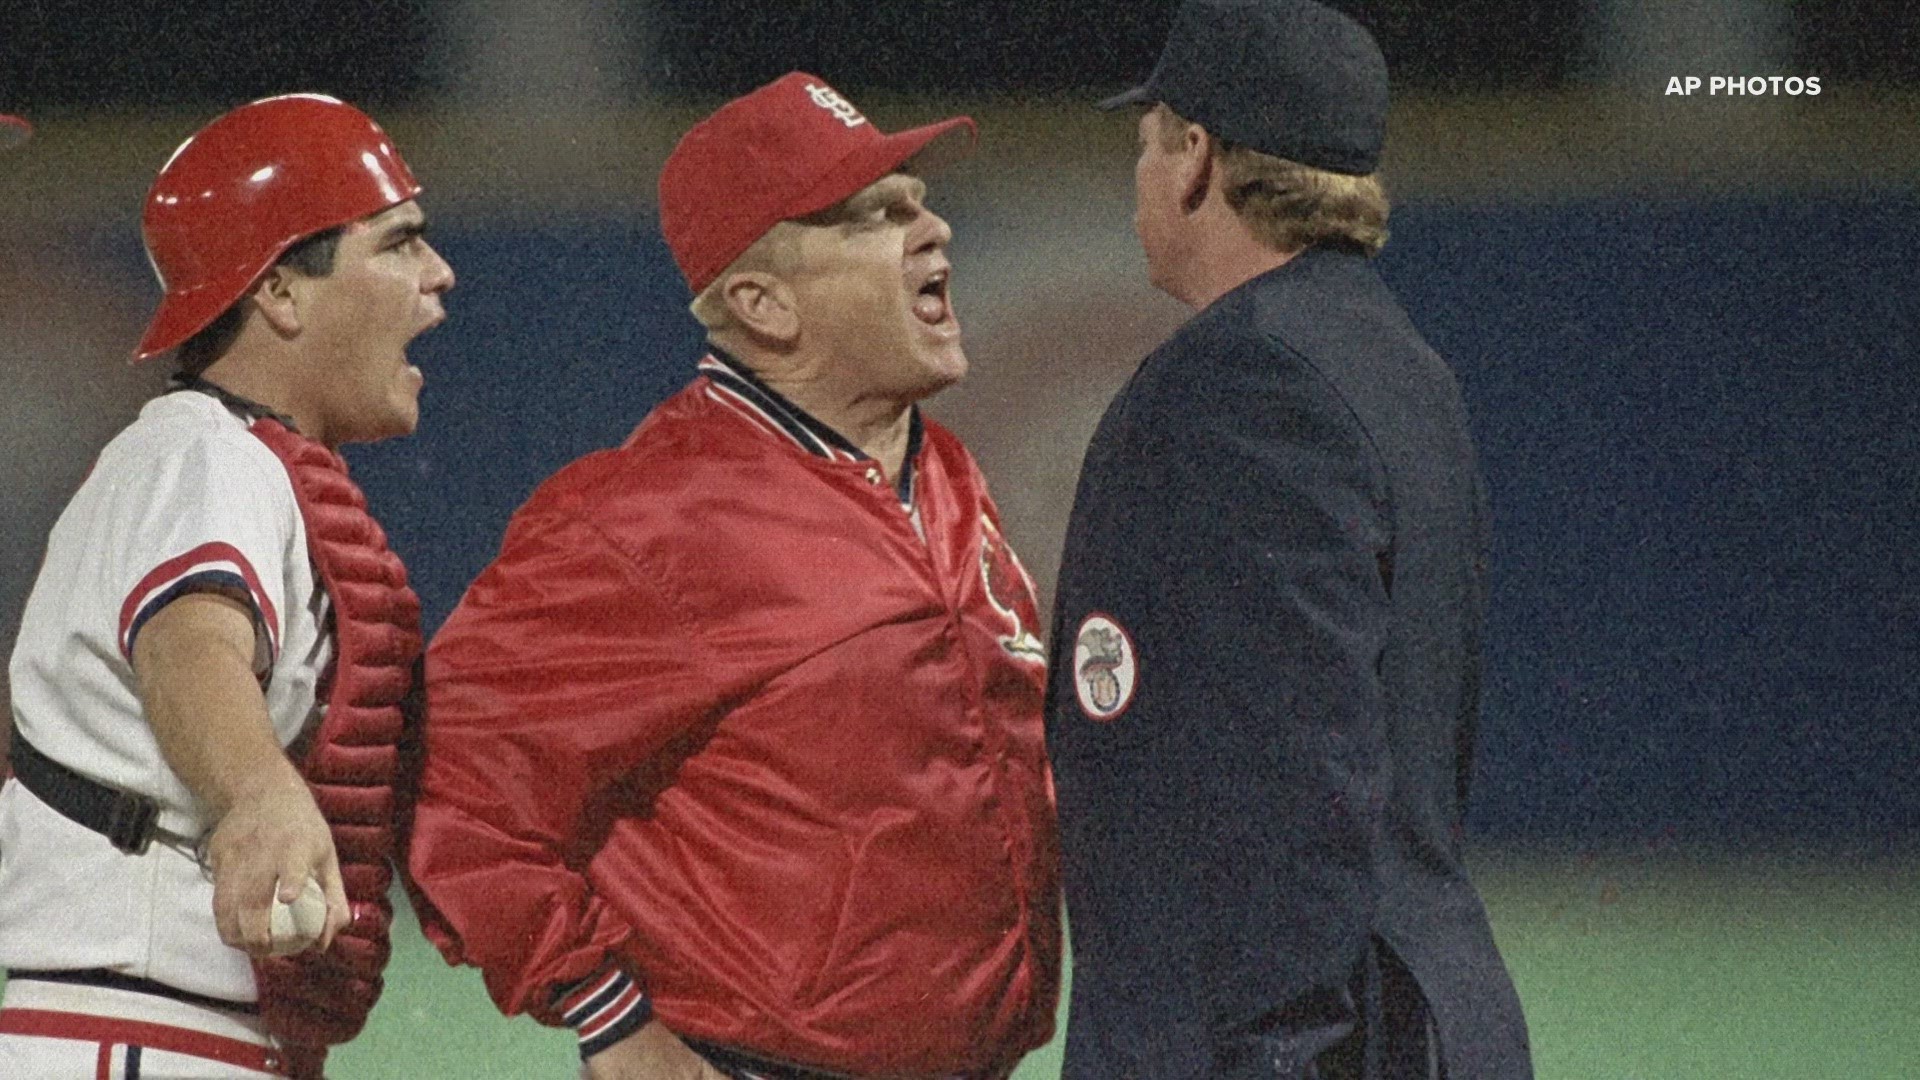 Former Cardinals manager Whitey Herzog has died. The community remembers him and Frank Cusumano shares Whitey's classic Pete Rose story.